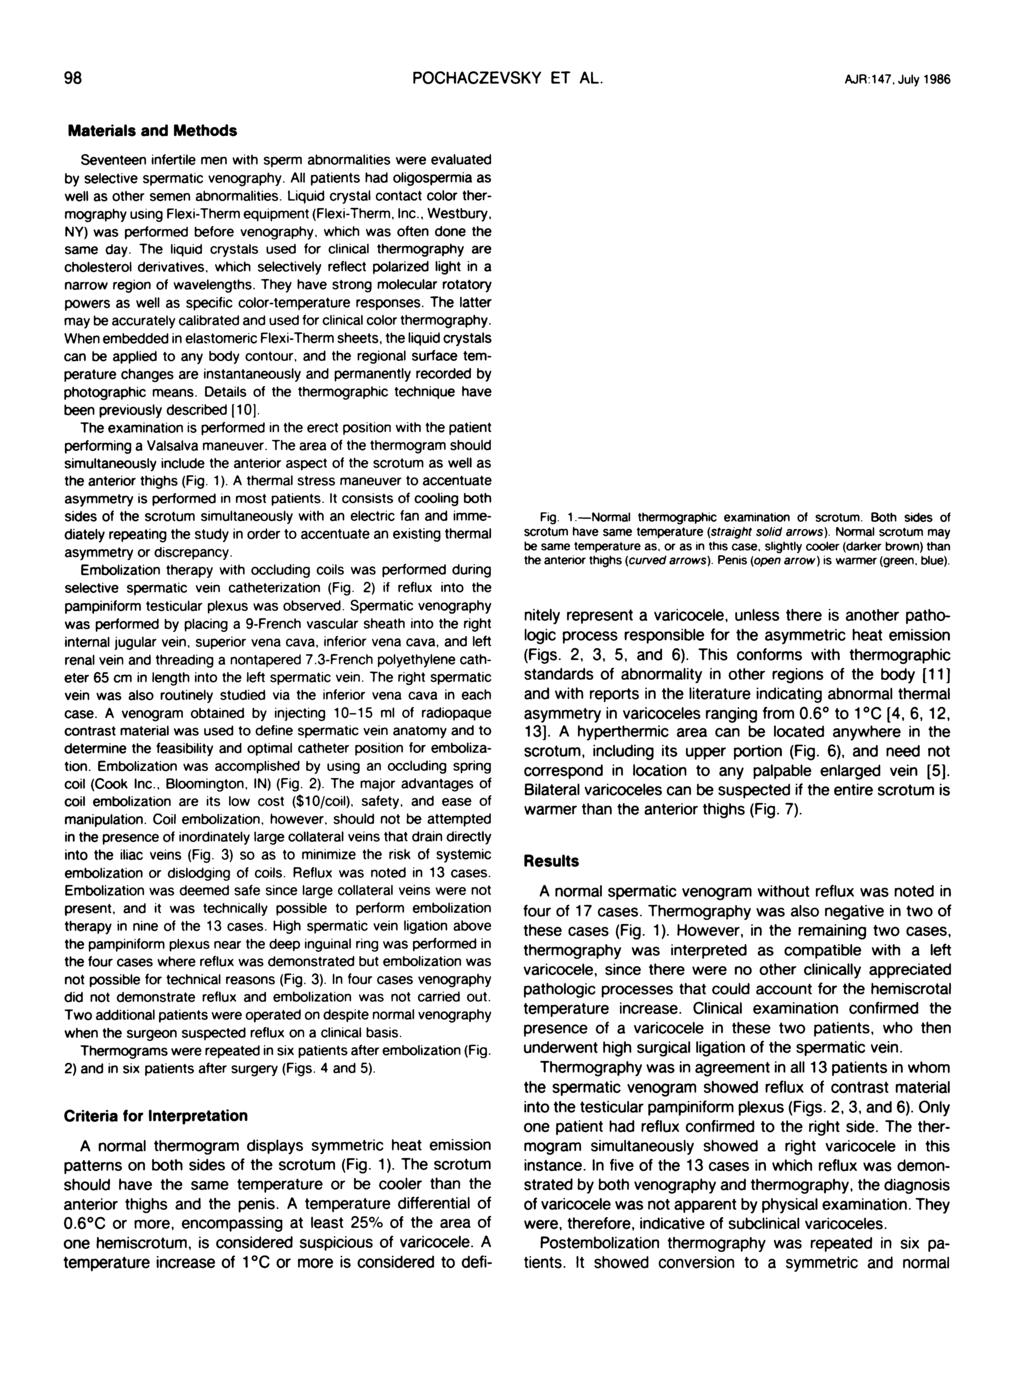 98 POCHACZEVSKY ET AL. AJR:147, July 1986 Materials and Methods Seventeen infertile men with sperm abnormalities were evaluated by selective spermatic venography.